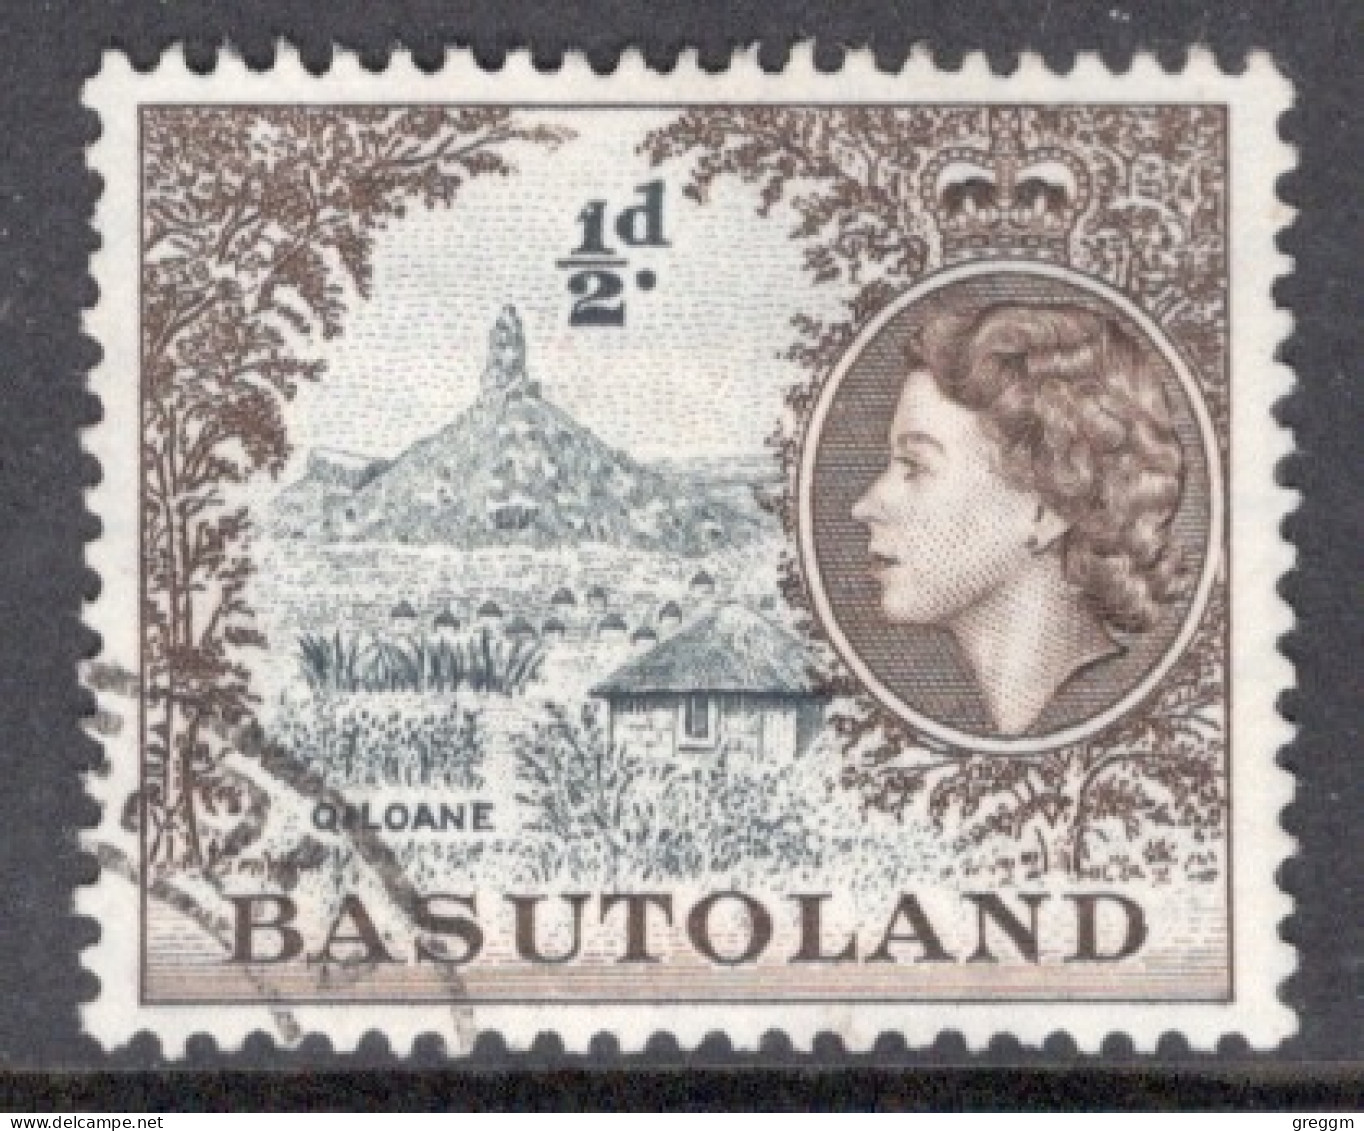 Basutoland 1954 Single ½d Stamp From The Queen Elizabeth Definitive Set. - 1933-1964 Crown Colony